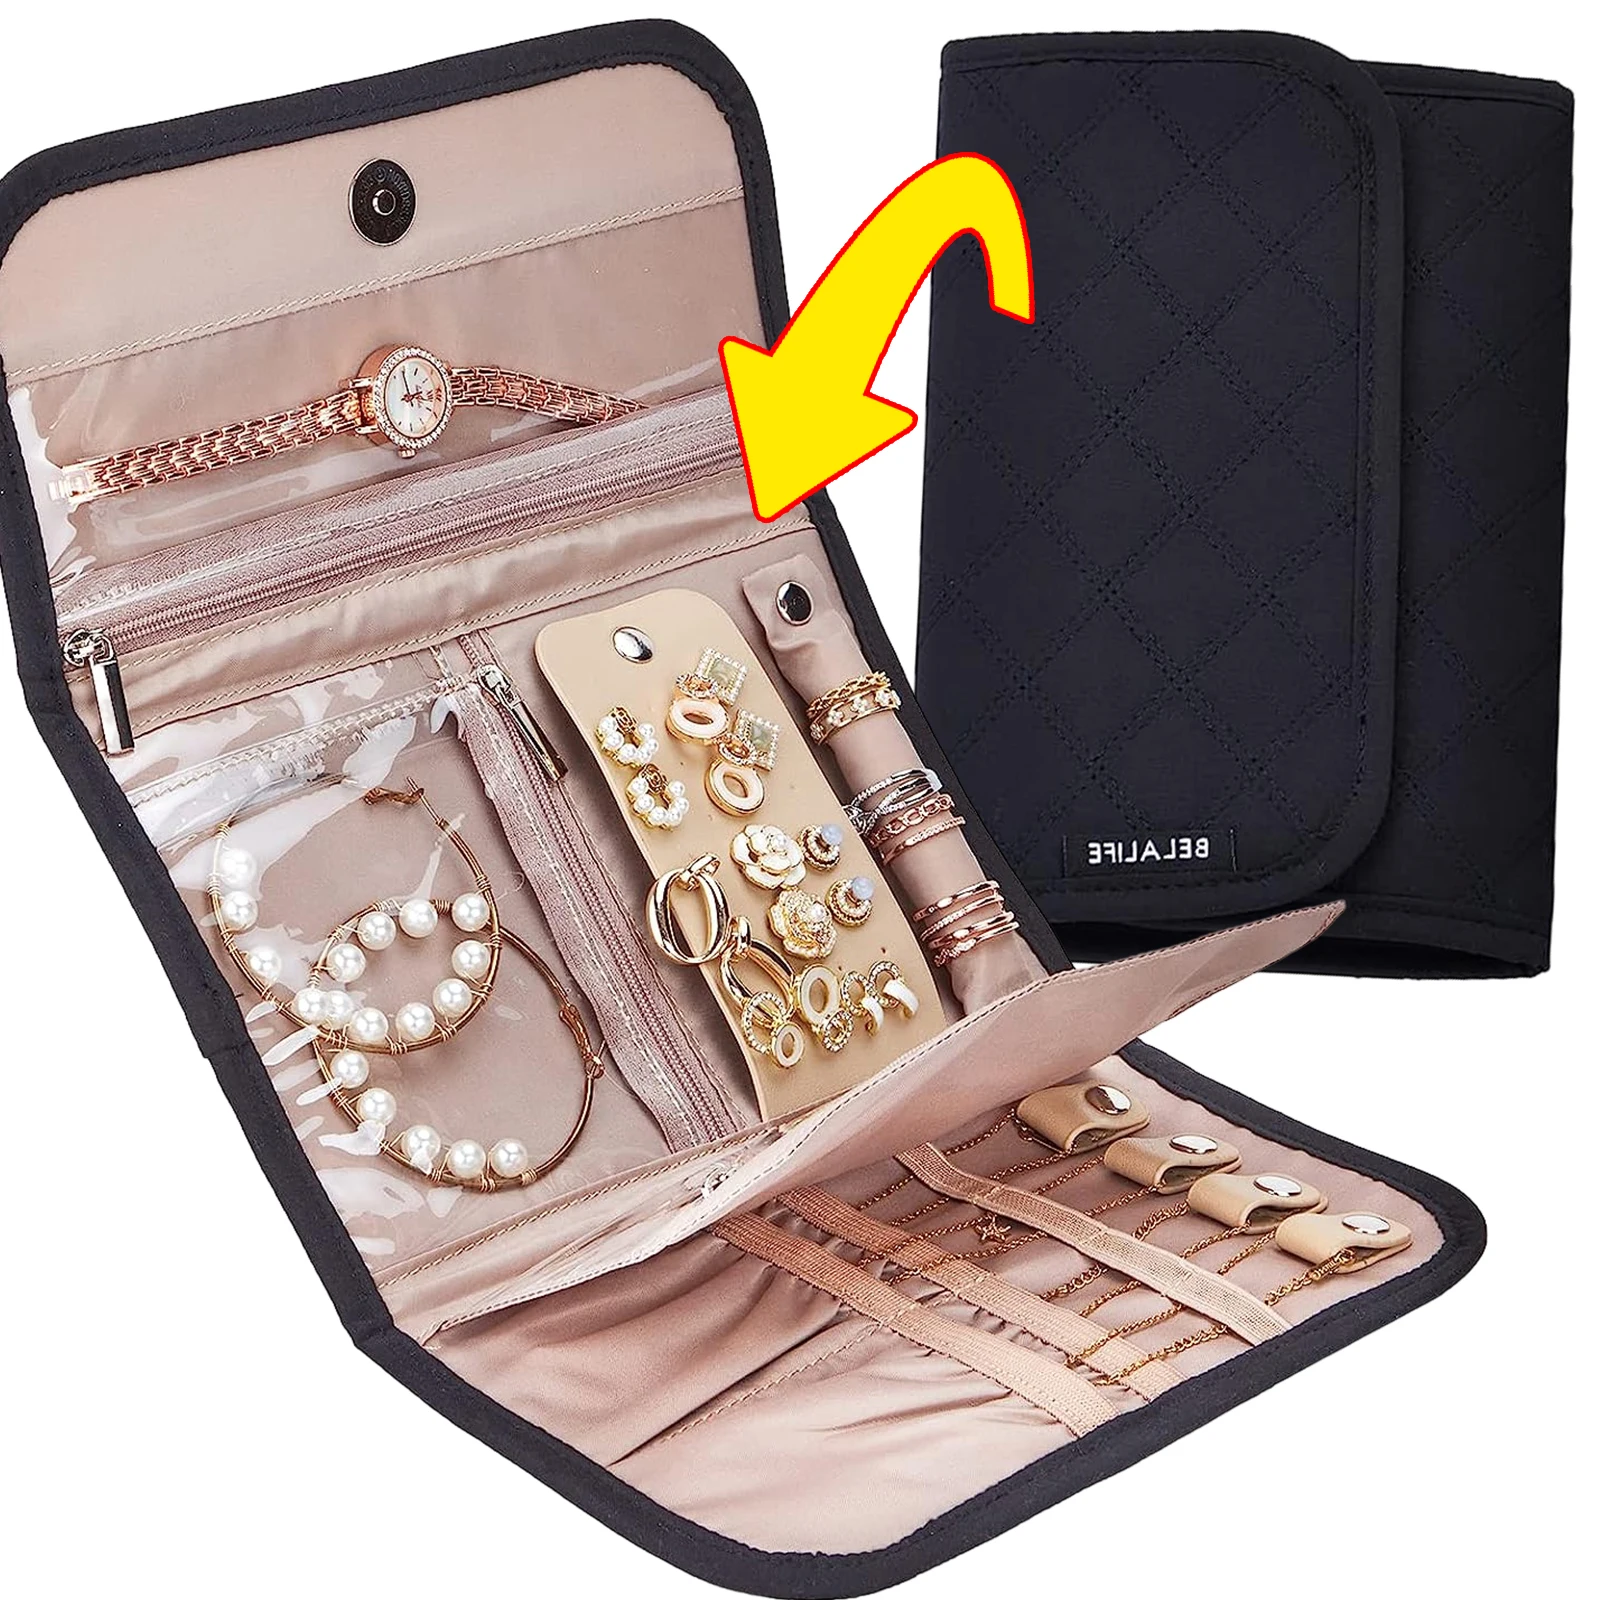 Roll Foldable Jewelry Case Travel Jewelry Organizer Portable for Journey Earrings Rings Diamond Necklaces Brooches Storage Bag large capacity jewelry case portable foldable travel earrings rings diamond necklaces brooches storage bag packaging display